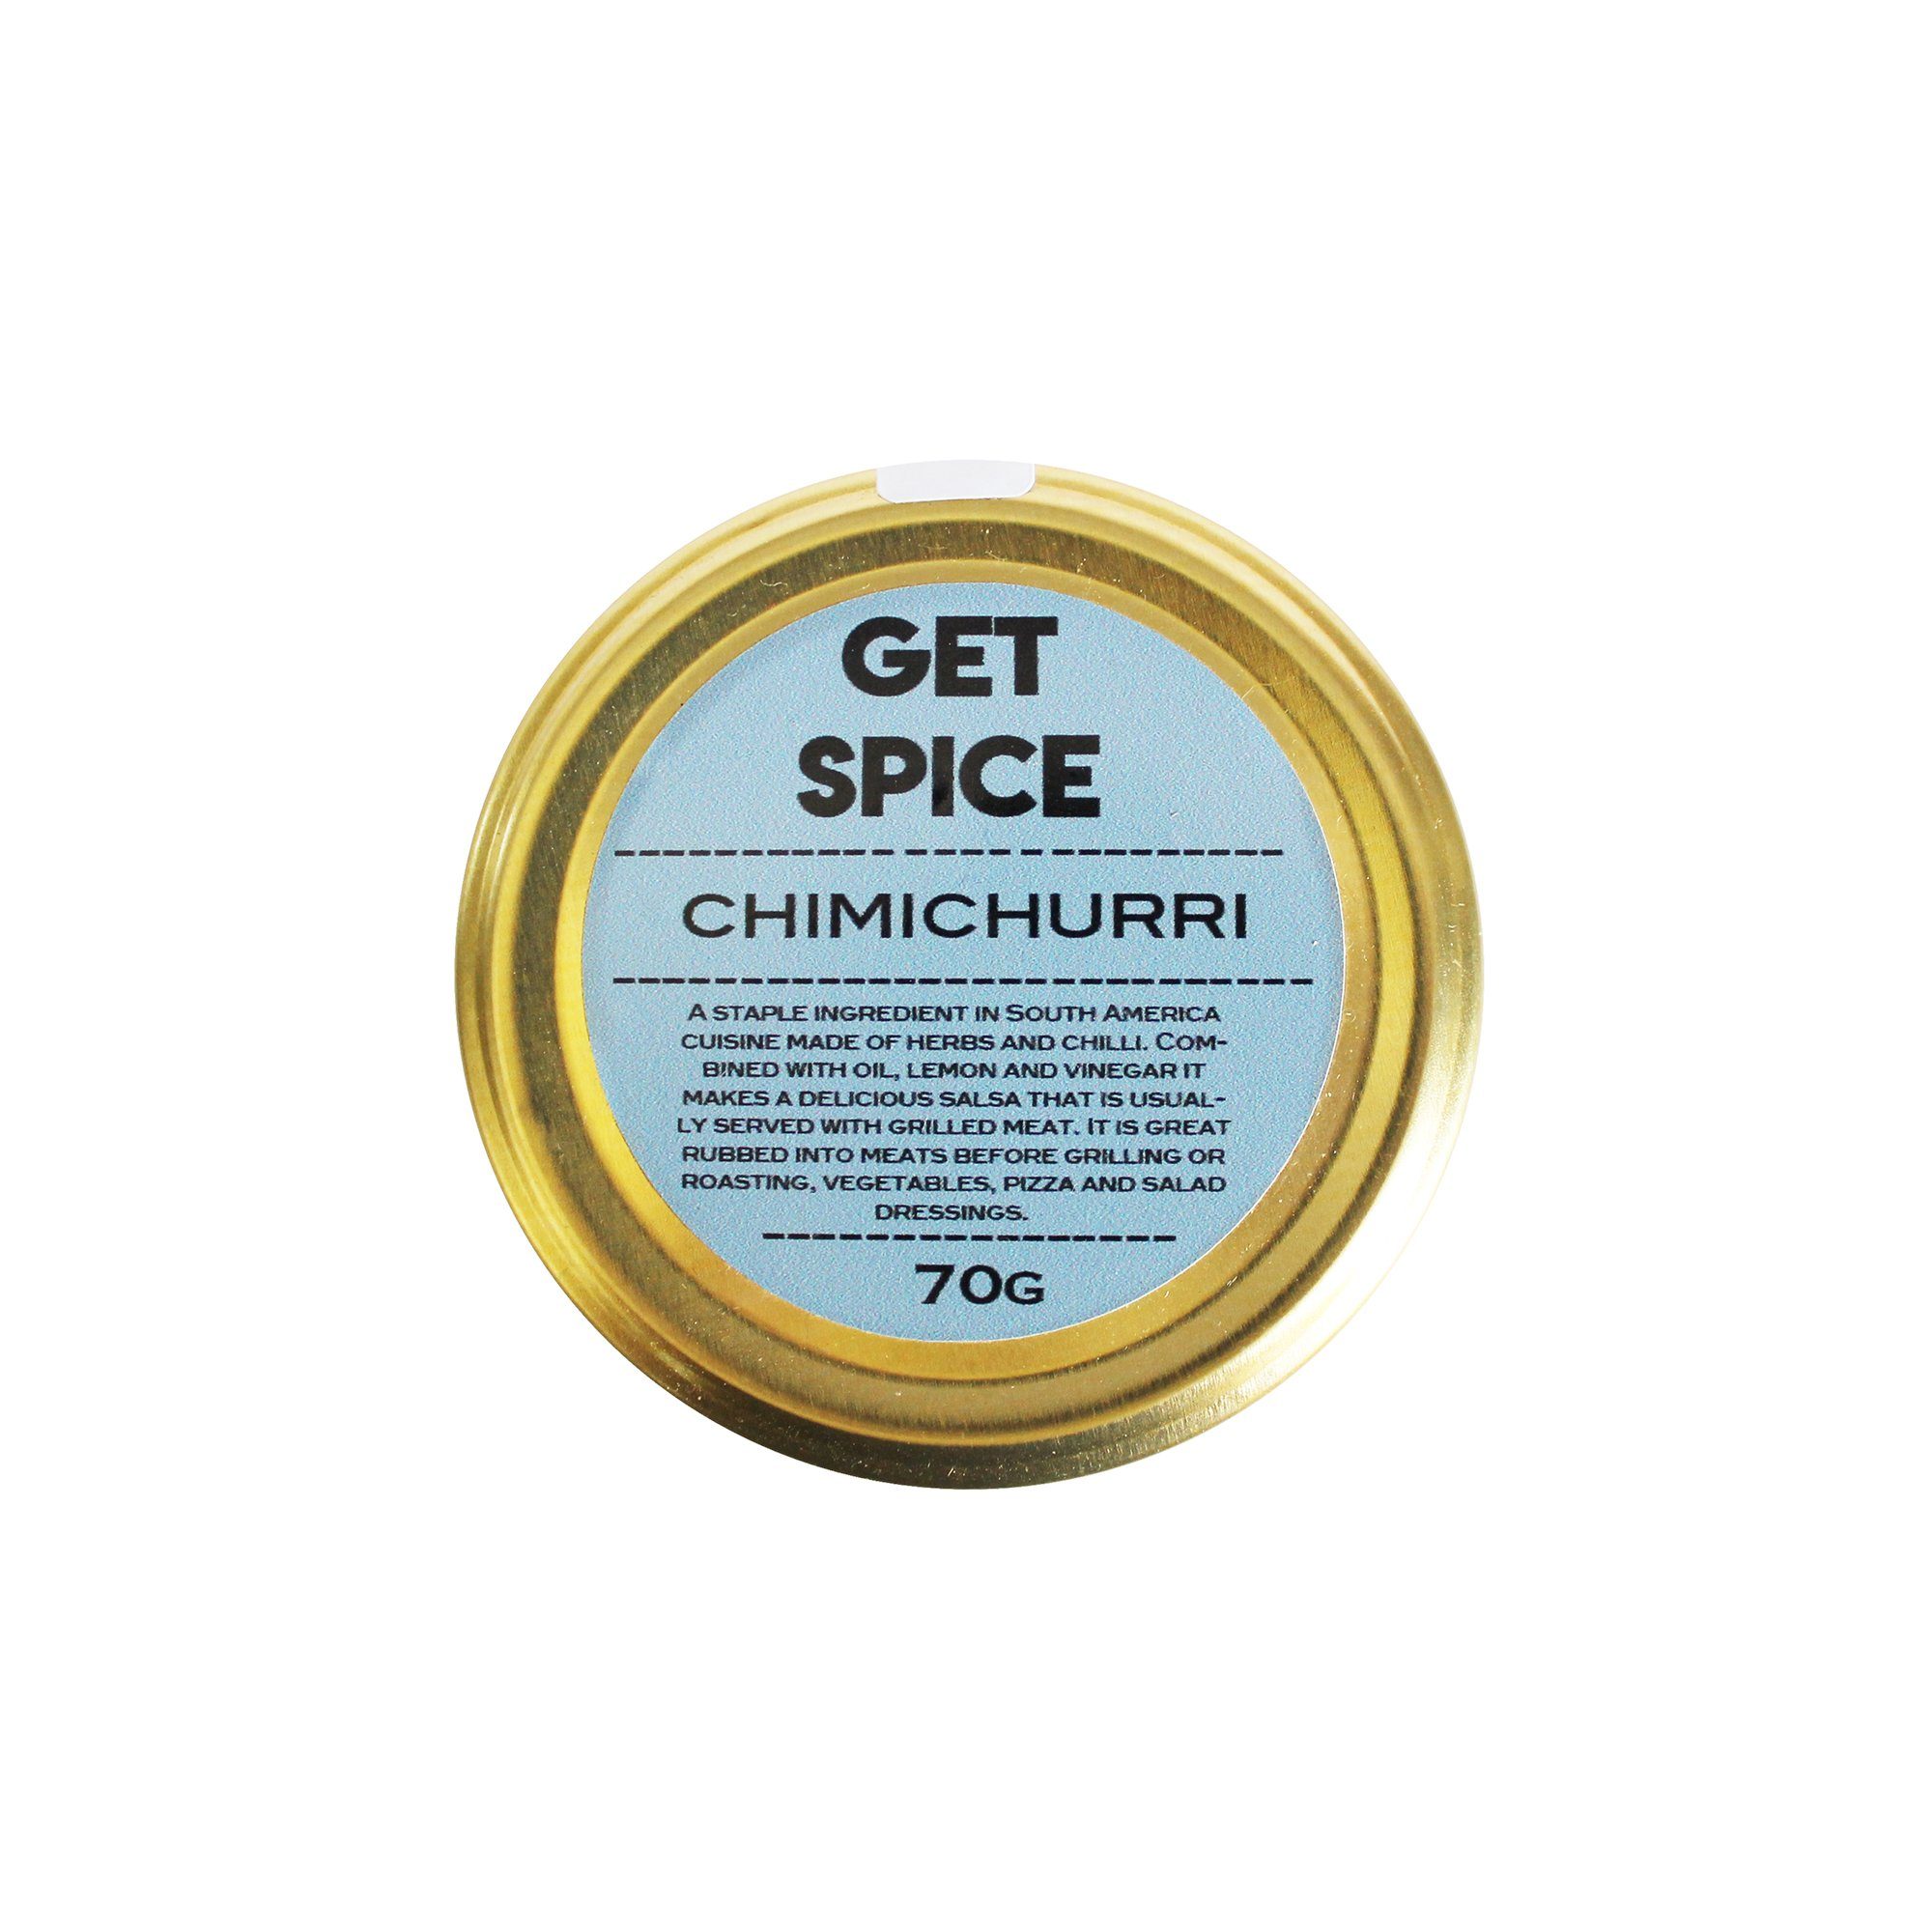 Get Spice American Chimichurri 70g Salts, Herbs & Spices Get Spice 